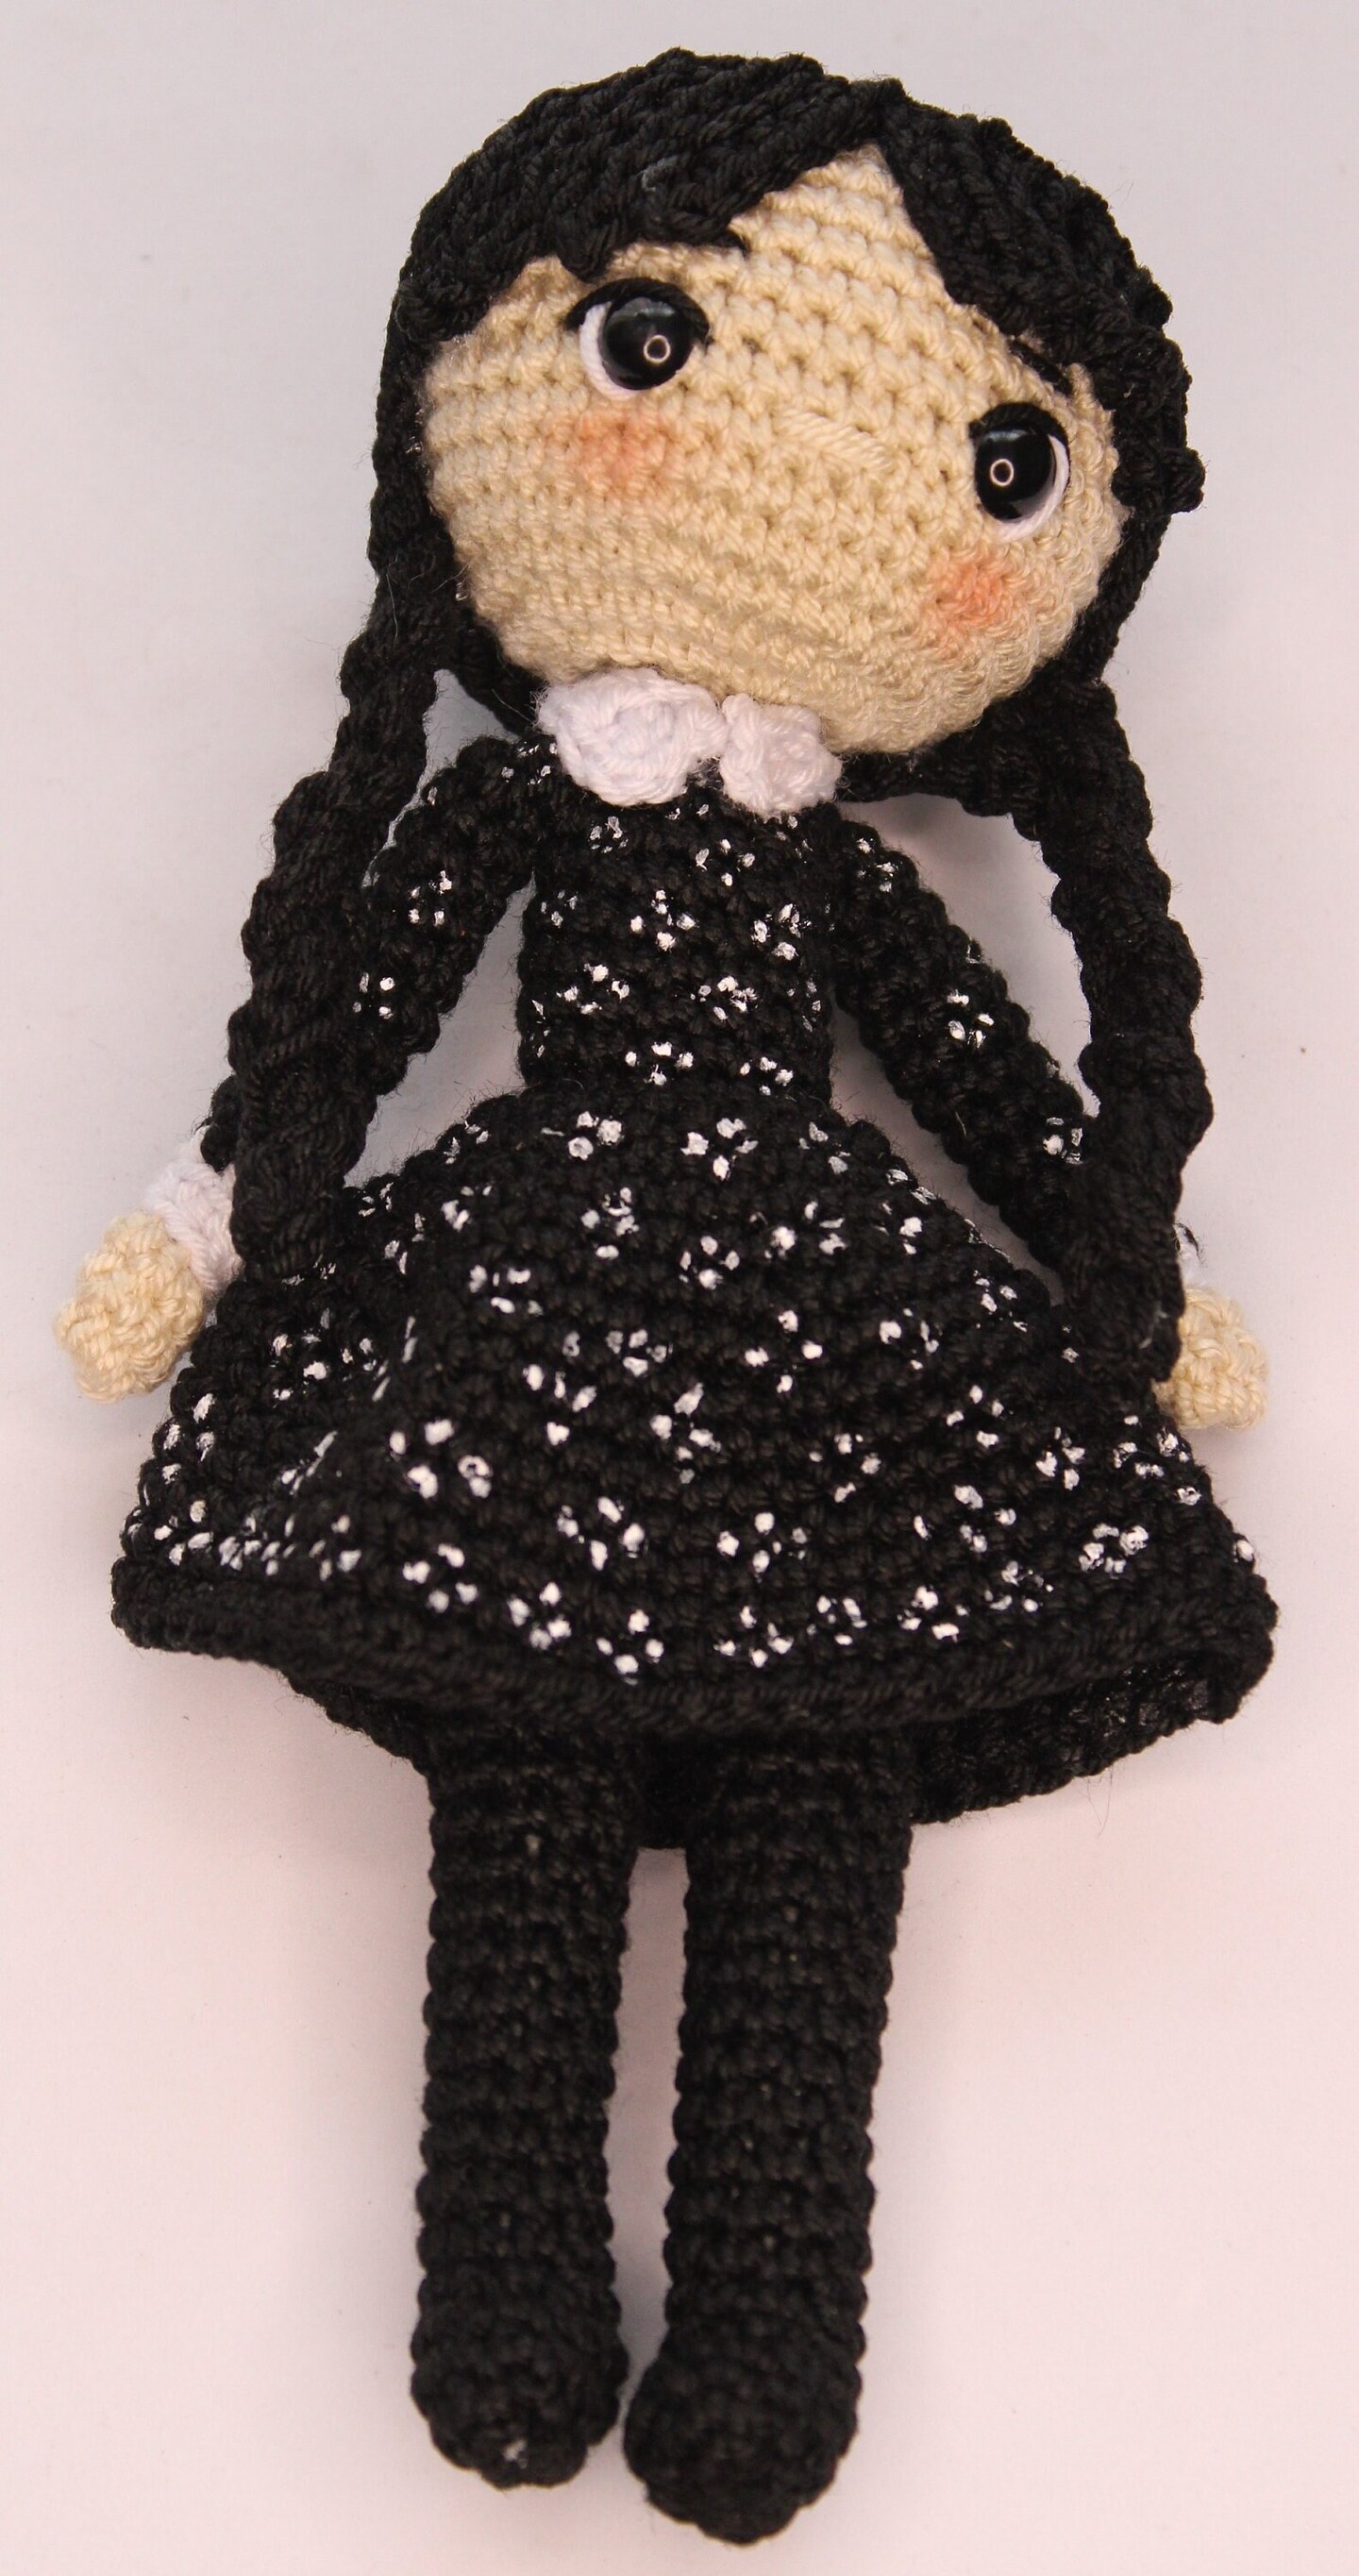 WEDNESDAY ADDAMS DOLL CROCHET PATTERN and 13 SPOOKY TALES (Paperback)